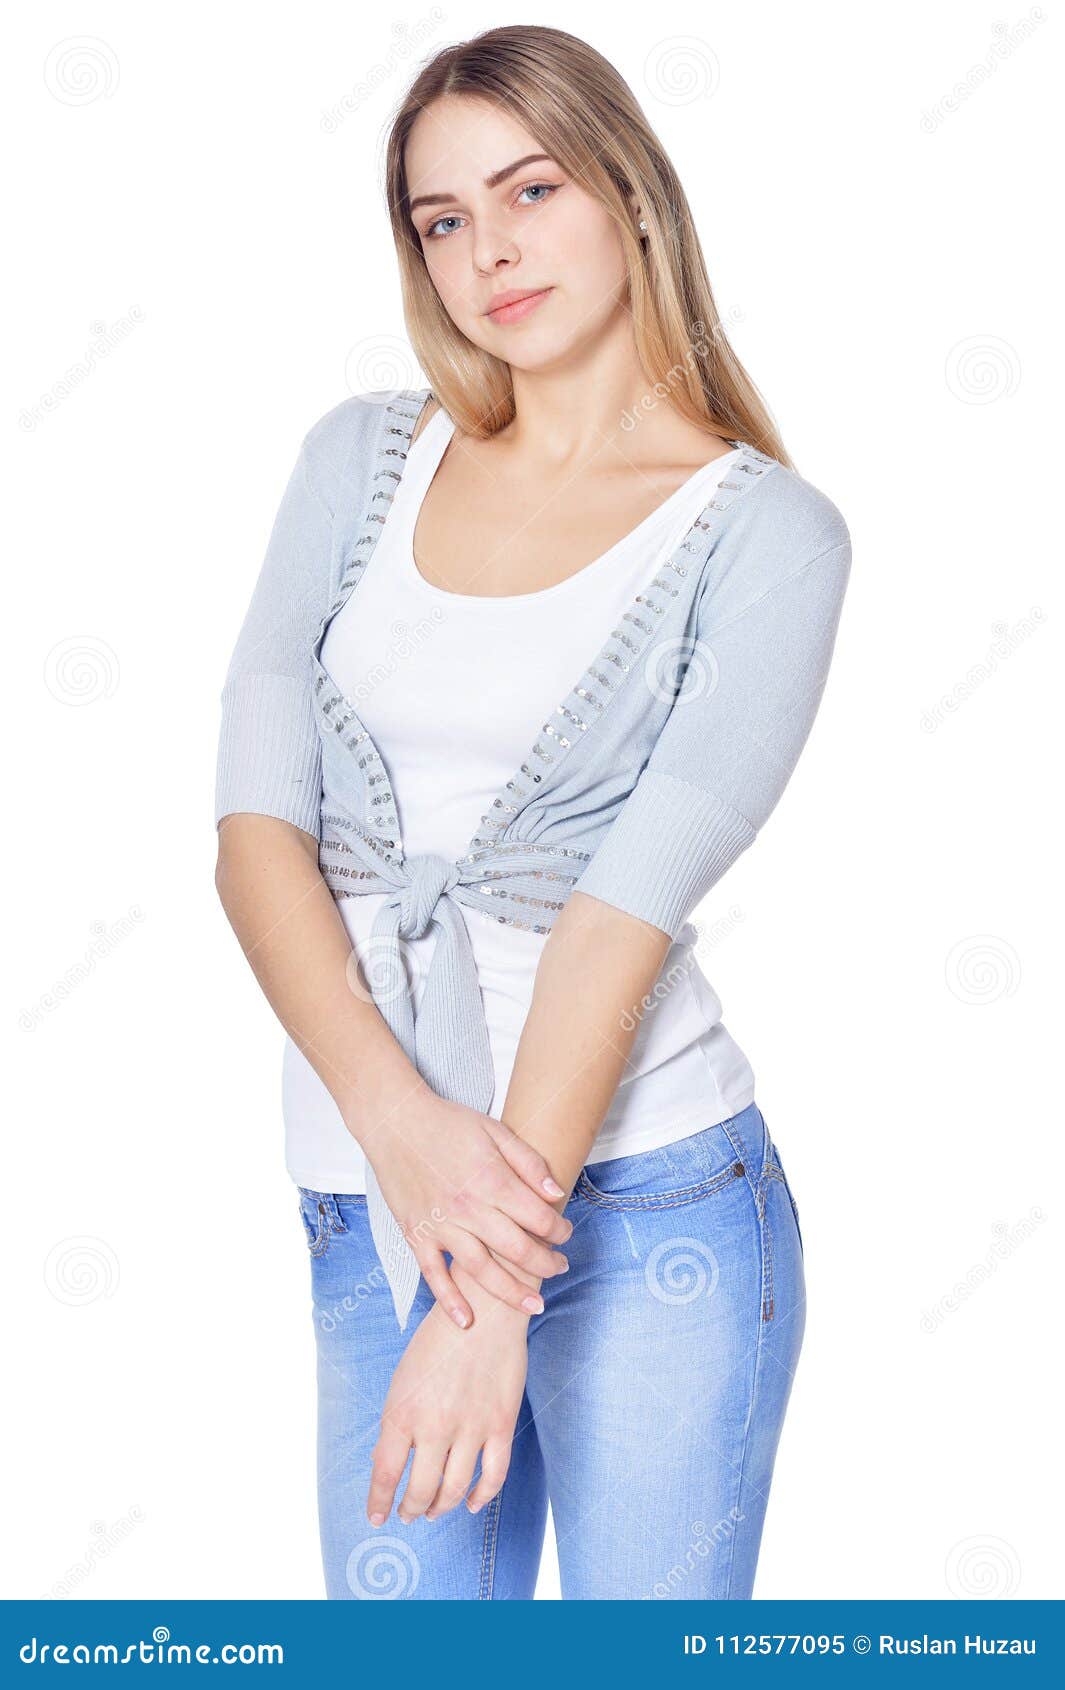 Beautiful Woman in Jeans Posing Stock Image - Image of admirable, femme ...